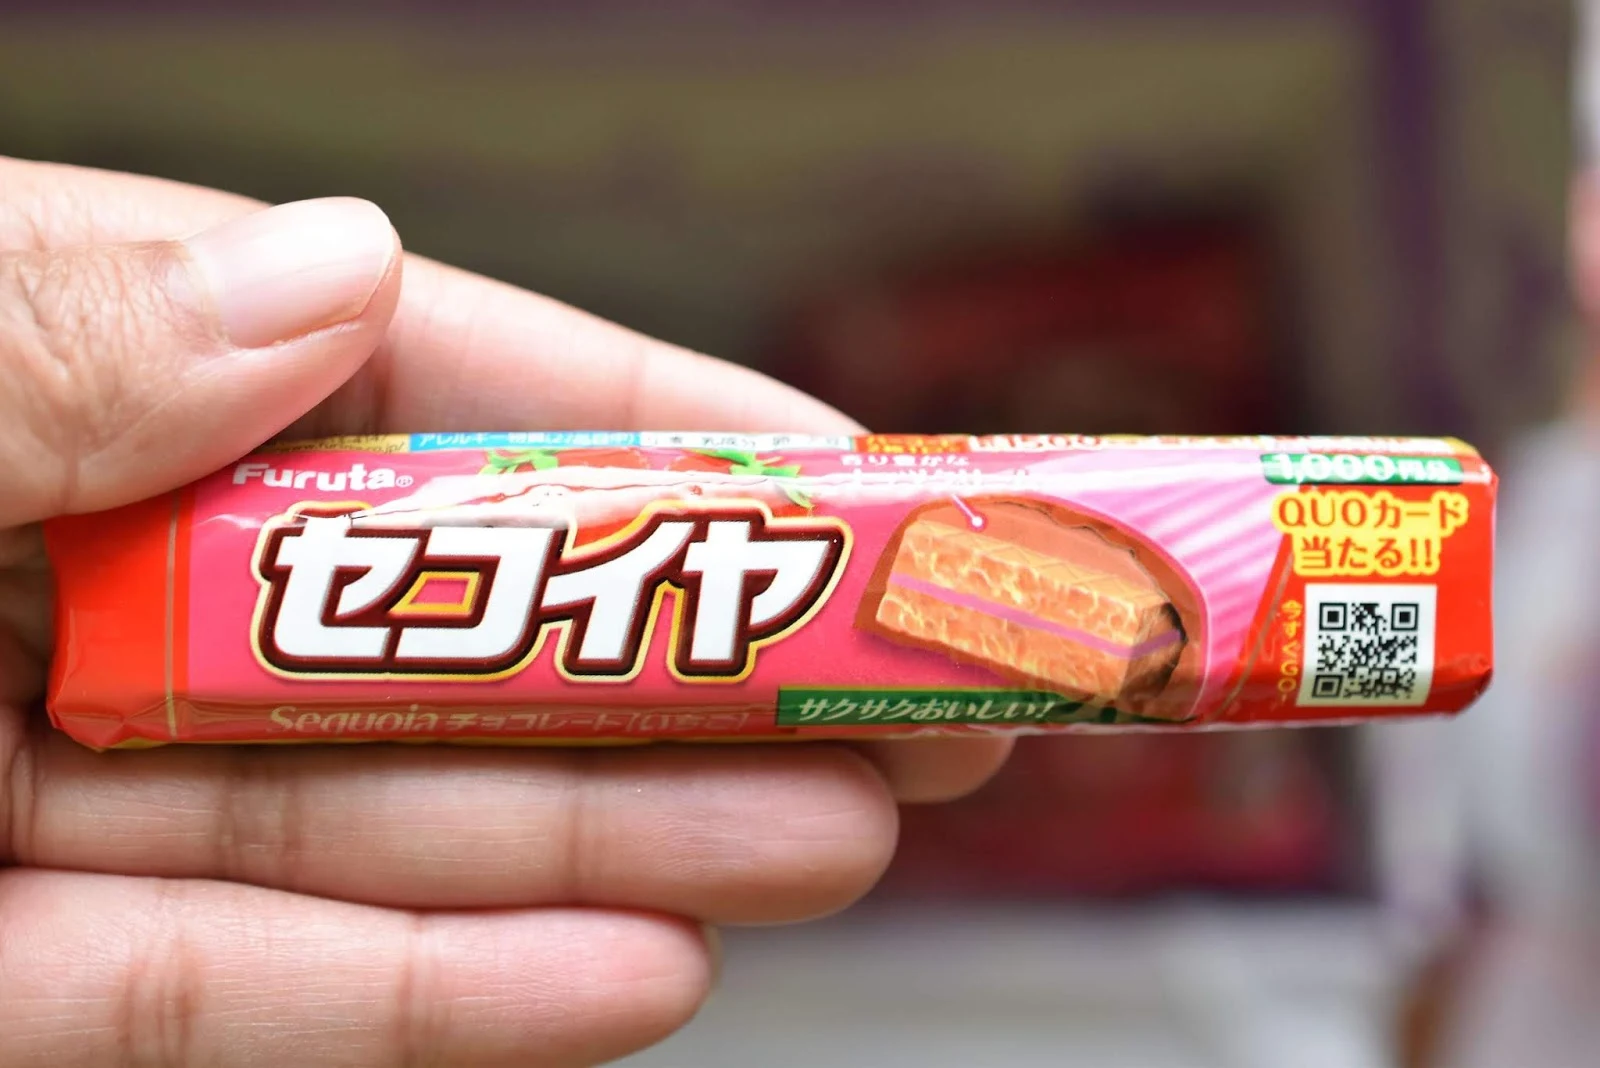 Valentine's Day Themed Japan Candy Box Review with Video  via  www.productreviewmom.com